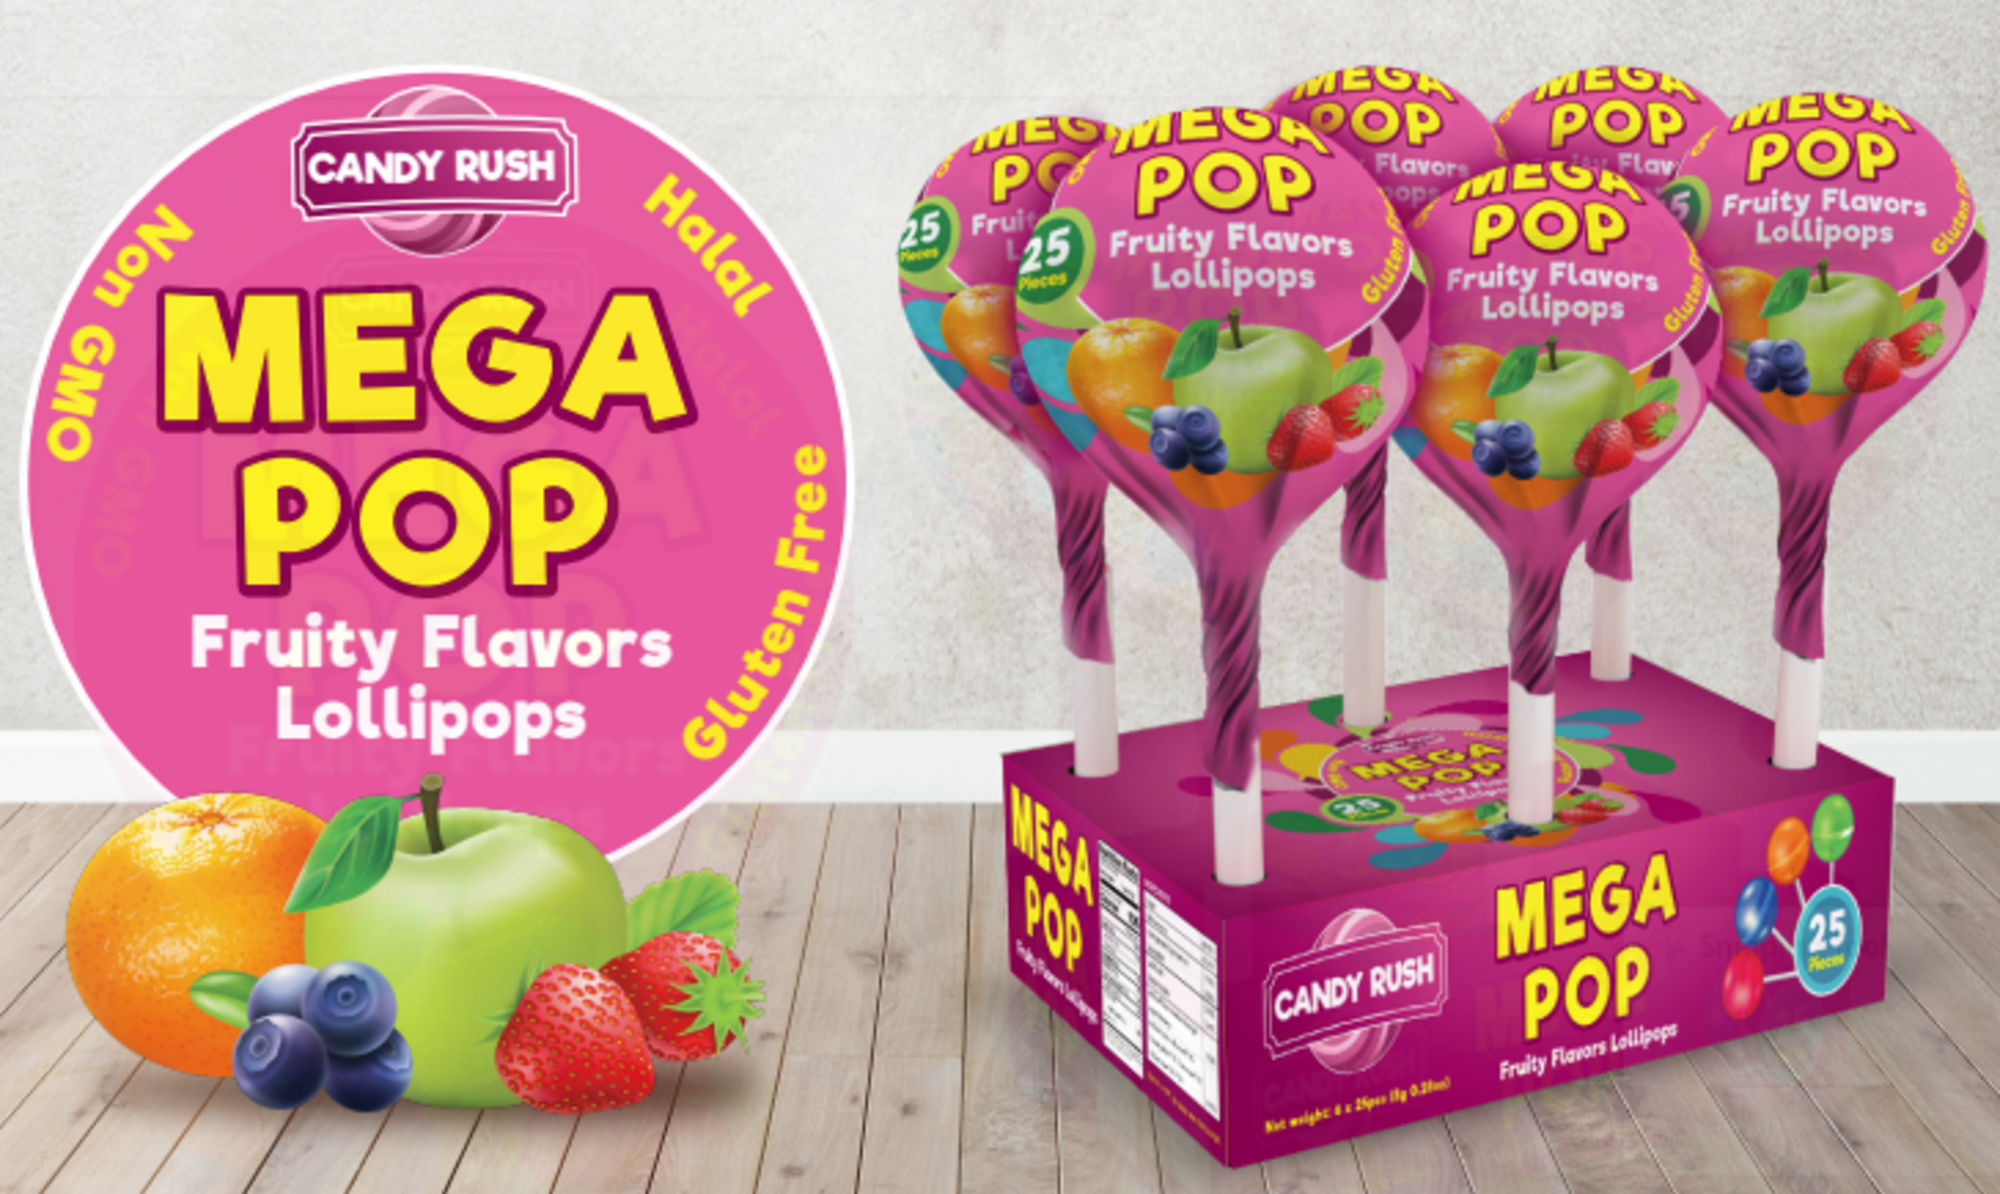 Candy Rush Mega Pop Fruity Flavors Lollipops (25 Pieces) - CURBSIDE PICK UP ONLY